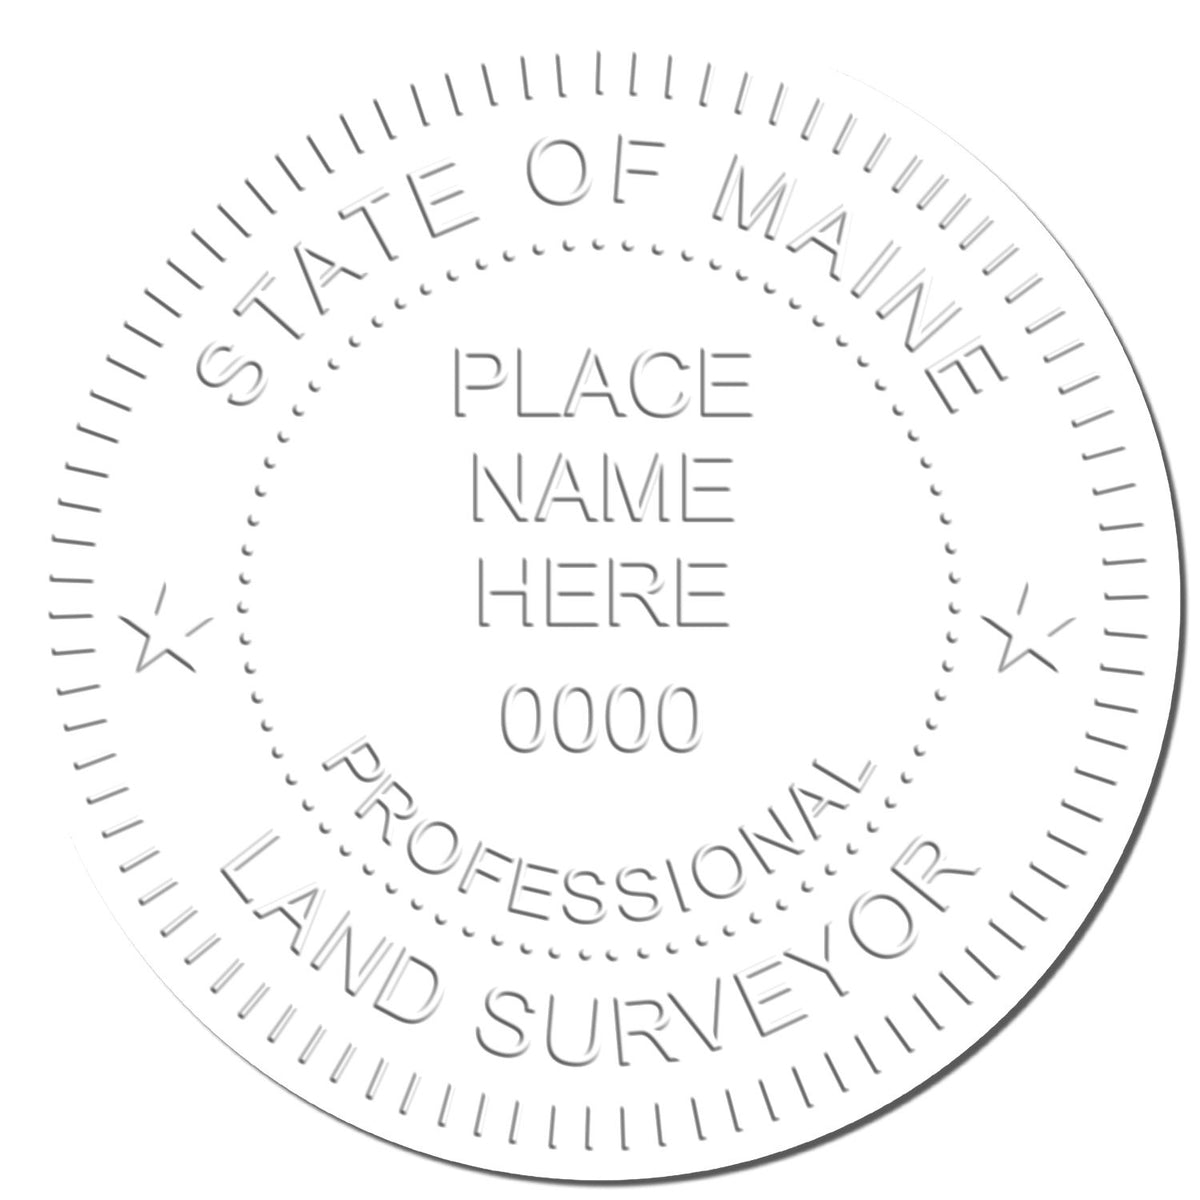 This paper is stamped with a sample imprint of the Long Reach Maine Land Surveyor Seal, signifying its quality and reliability.